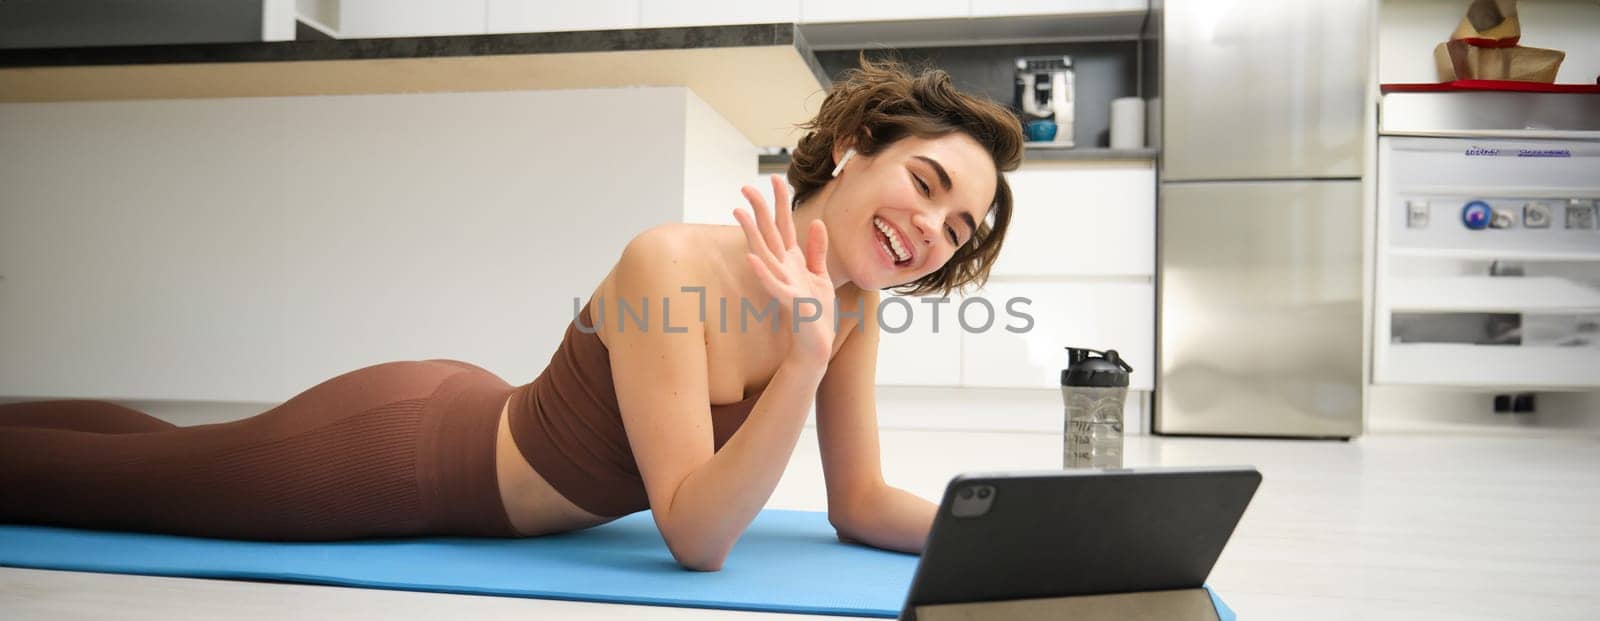 Sport and lifestyle. Young fitness woman, gym instructor waves hand at tablet, joins online video class, yoga and mindfulness workout, training from home indoors.